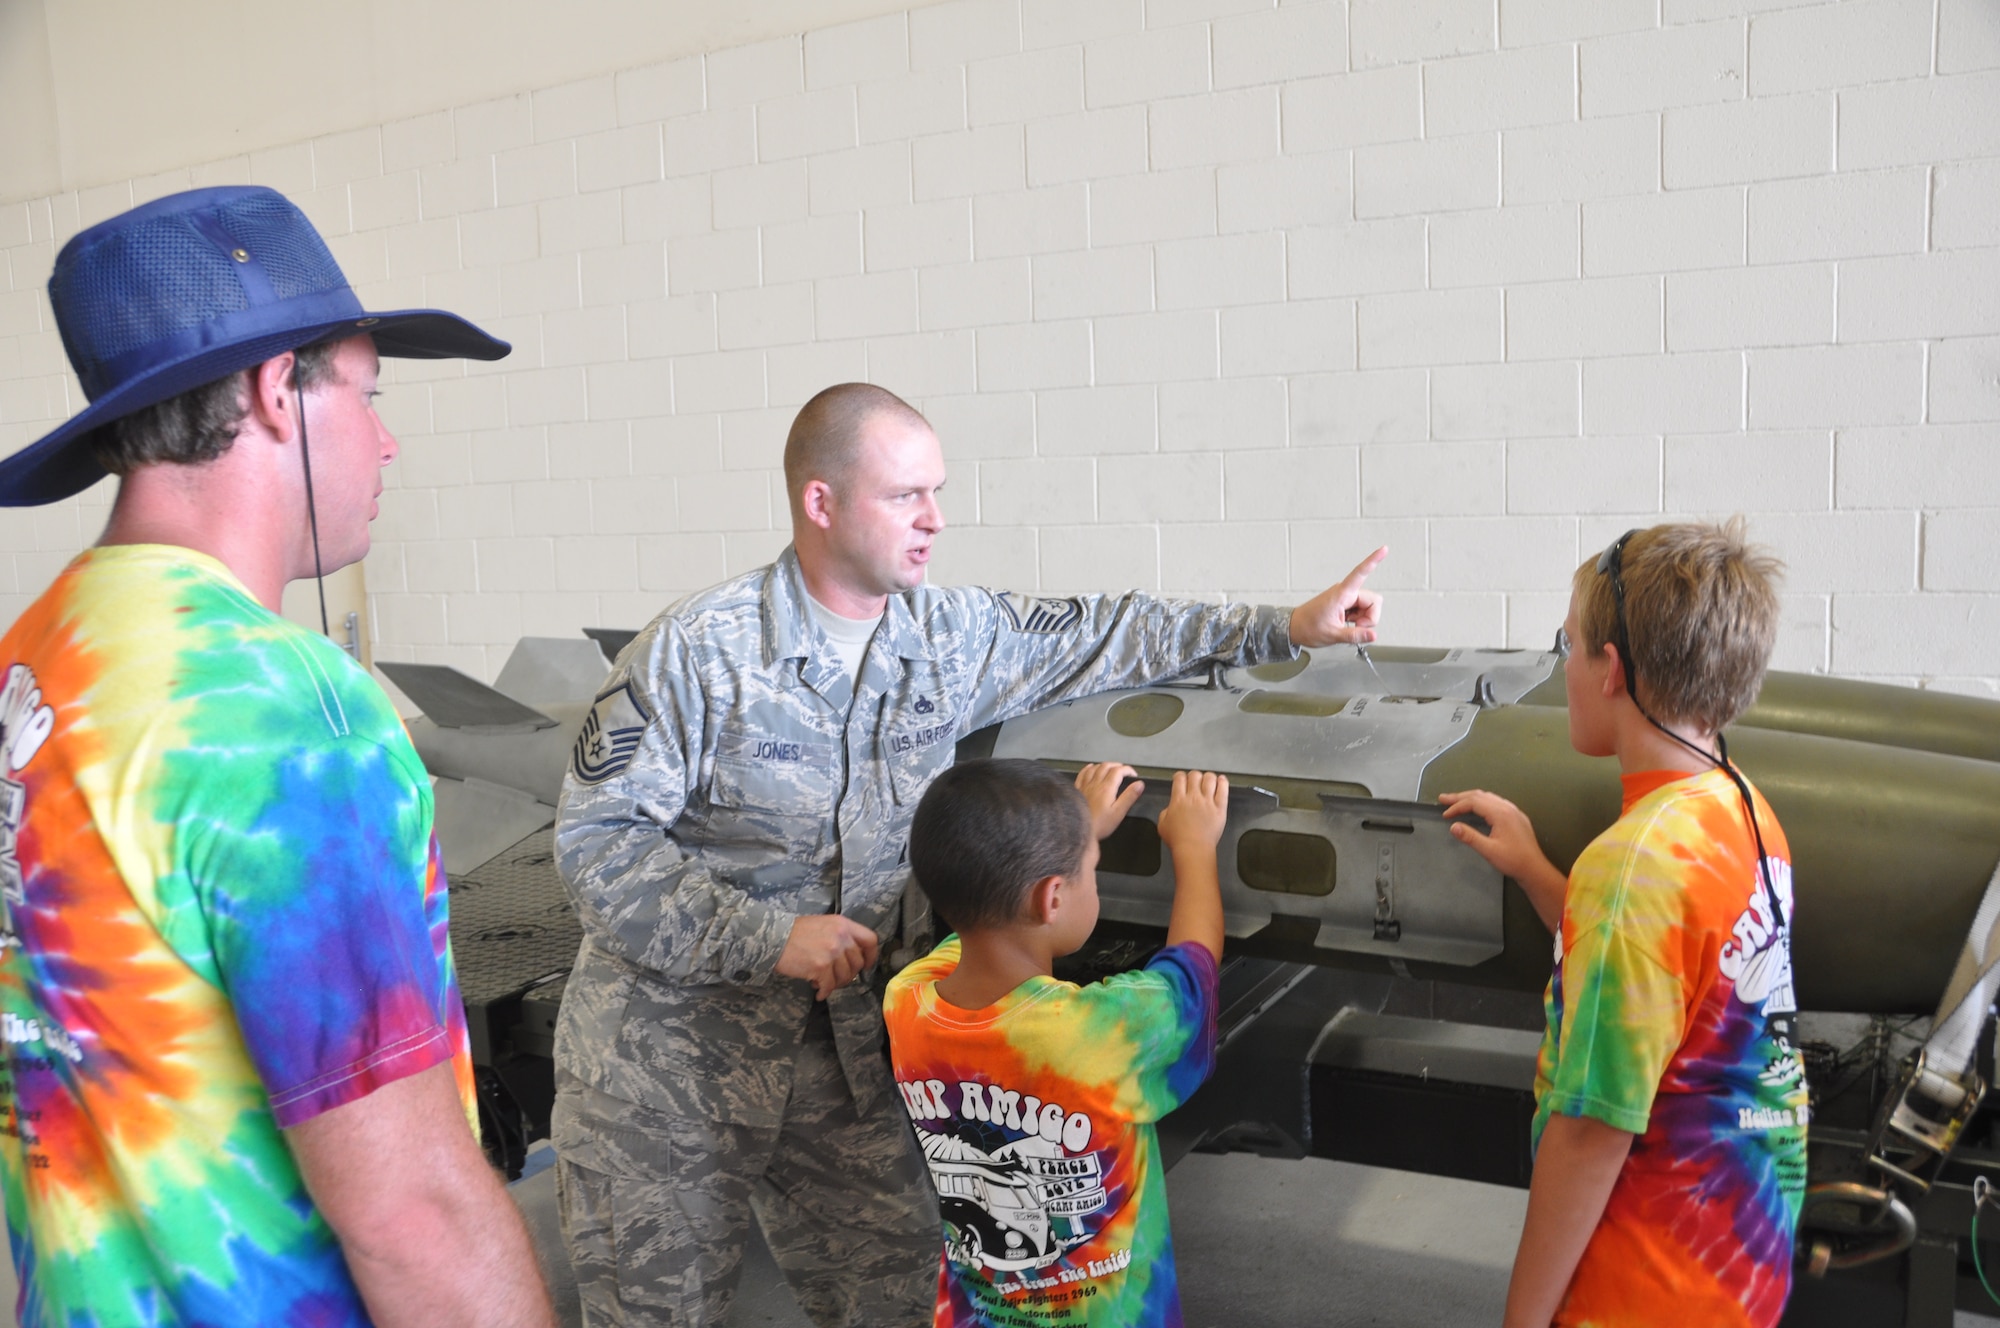 Master Sgt. Jeff Jones, a F-22 loading standardization crew chief, talks with burn survivors from Camp Amigo during their tour of Tyndall July 15.  (U.S. Air Force photo/Senior Airman Veronica McMahon)